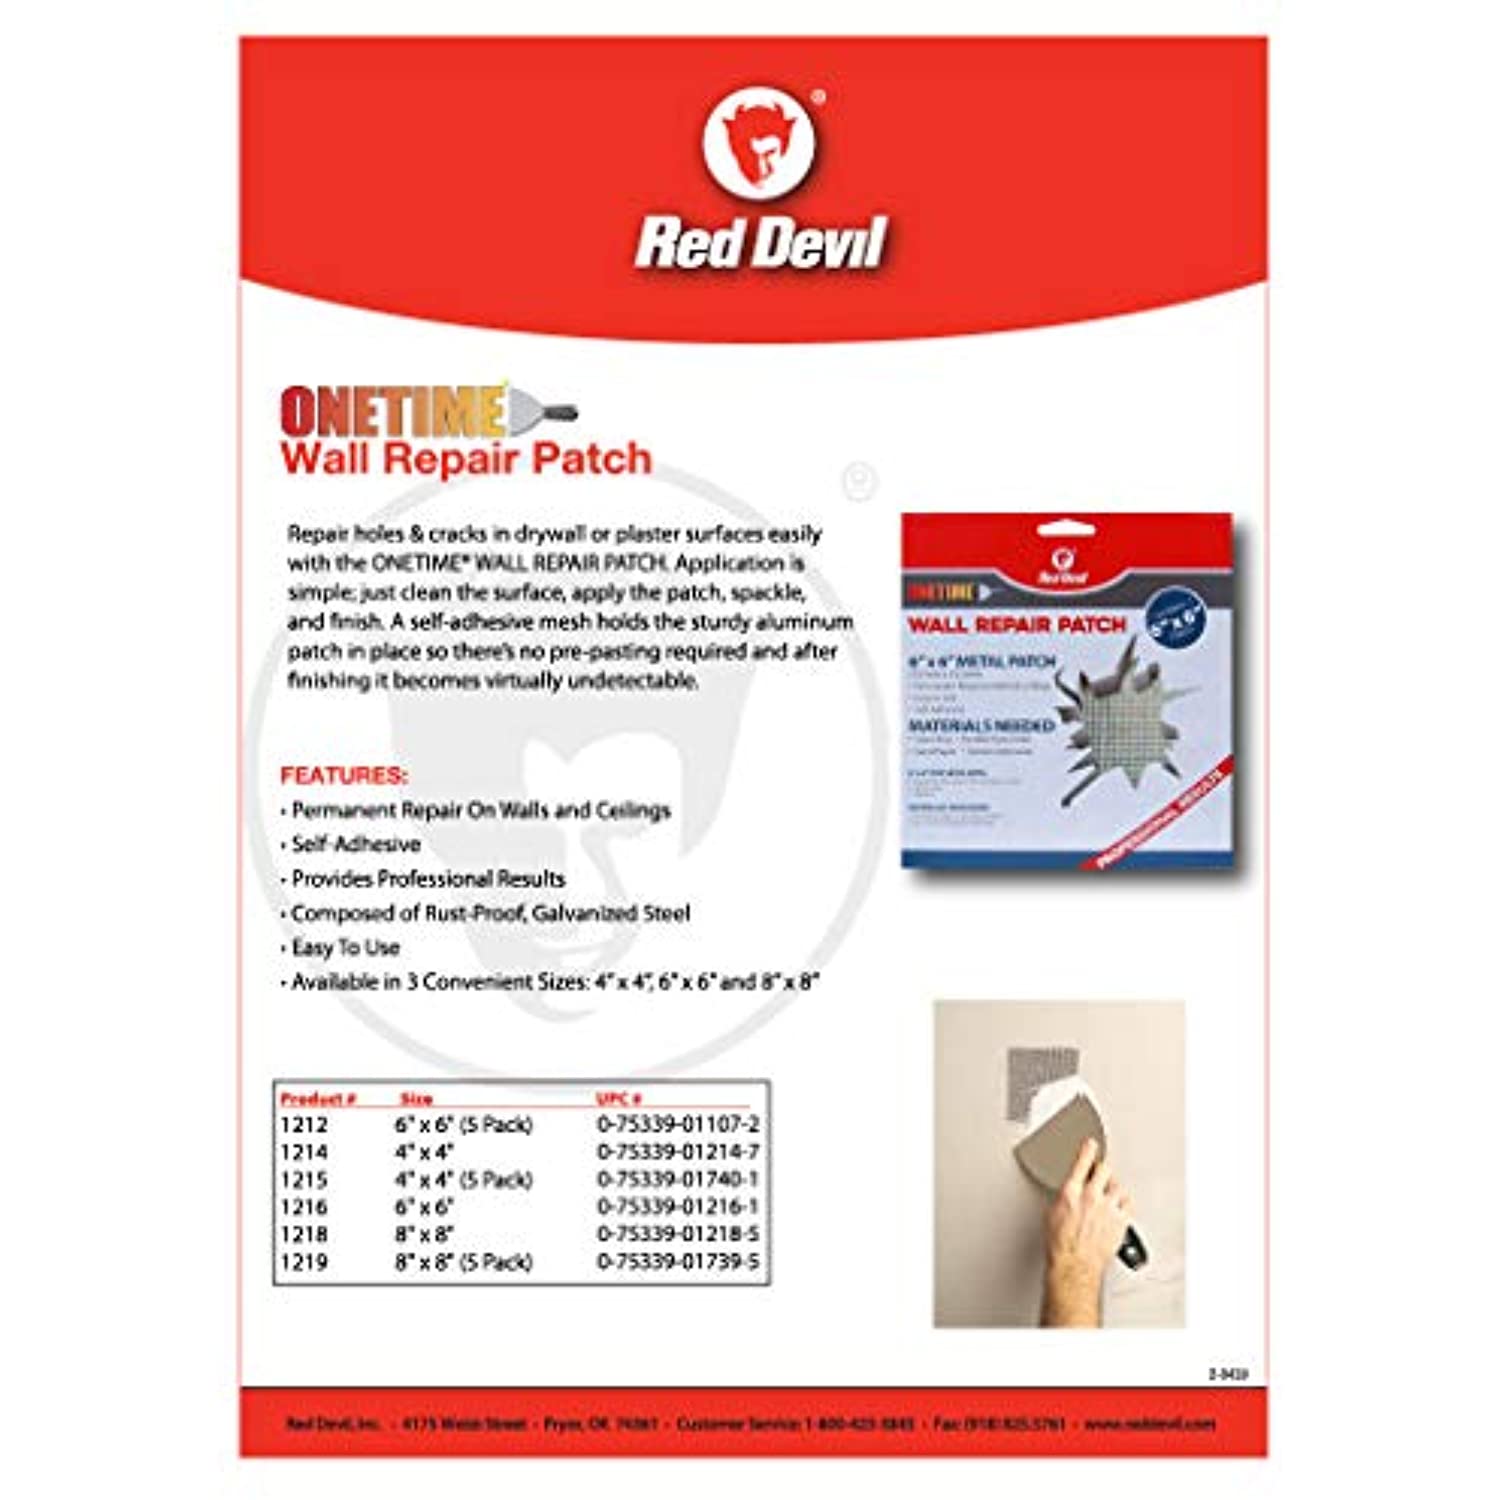 Red Devil 1216 6" x 6" ONETIME, 1 Pack Wall Repair Patch, 6 inch, Aluminum